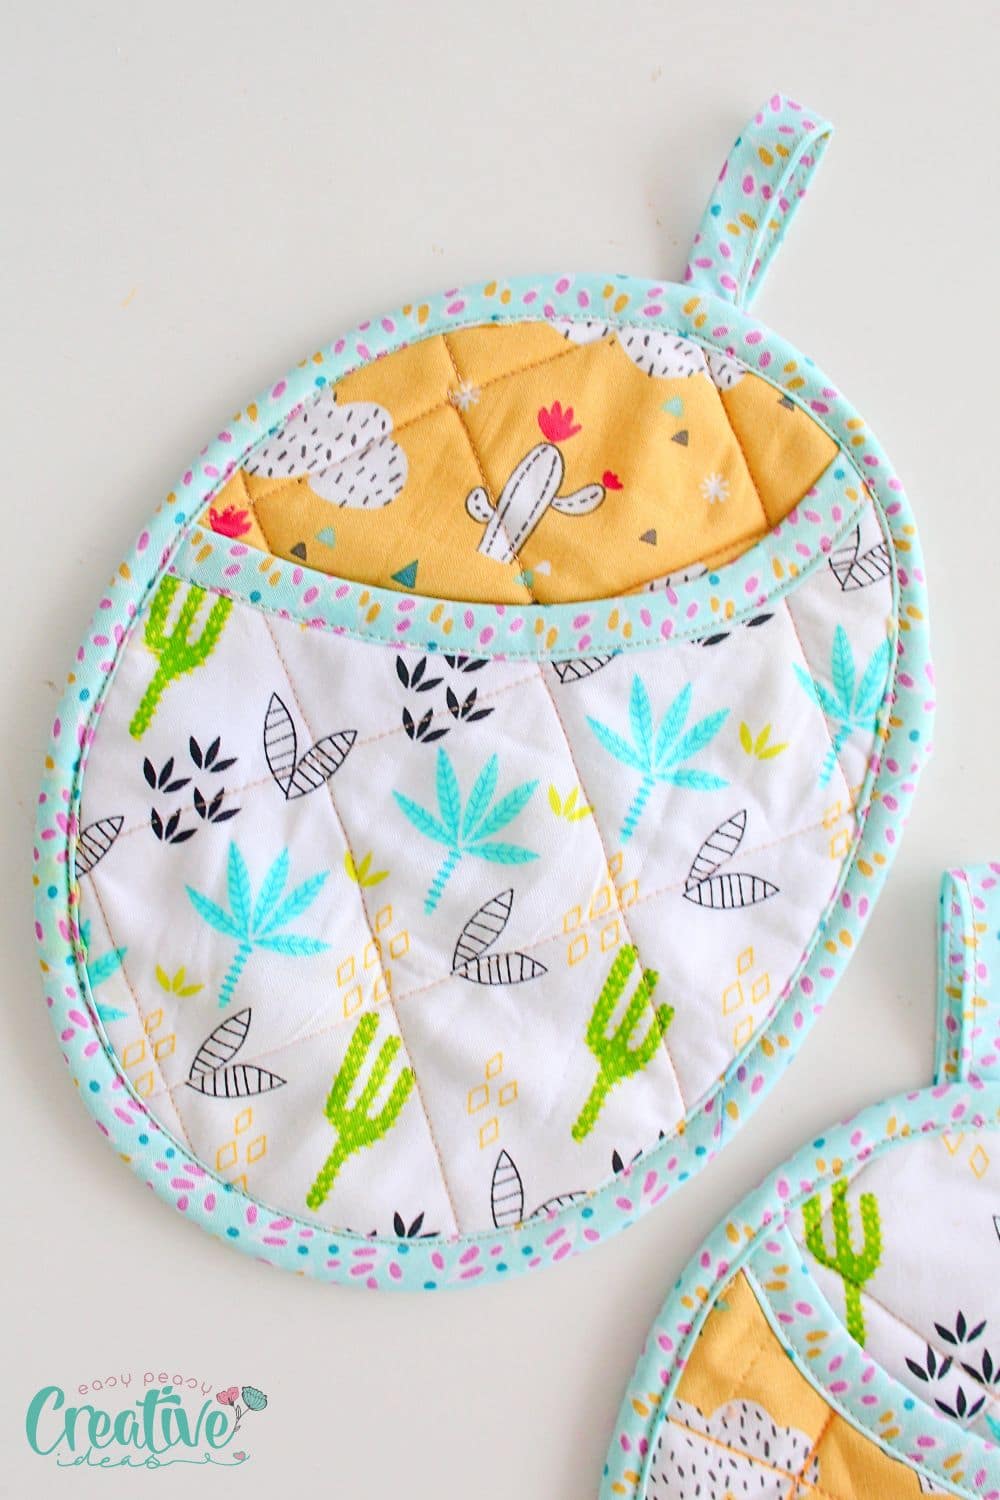 Sewing potholders with pockets